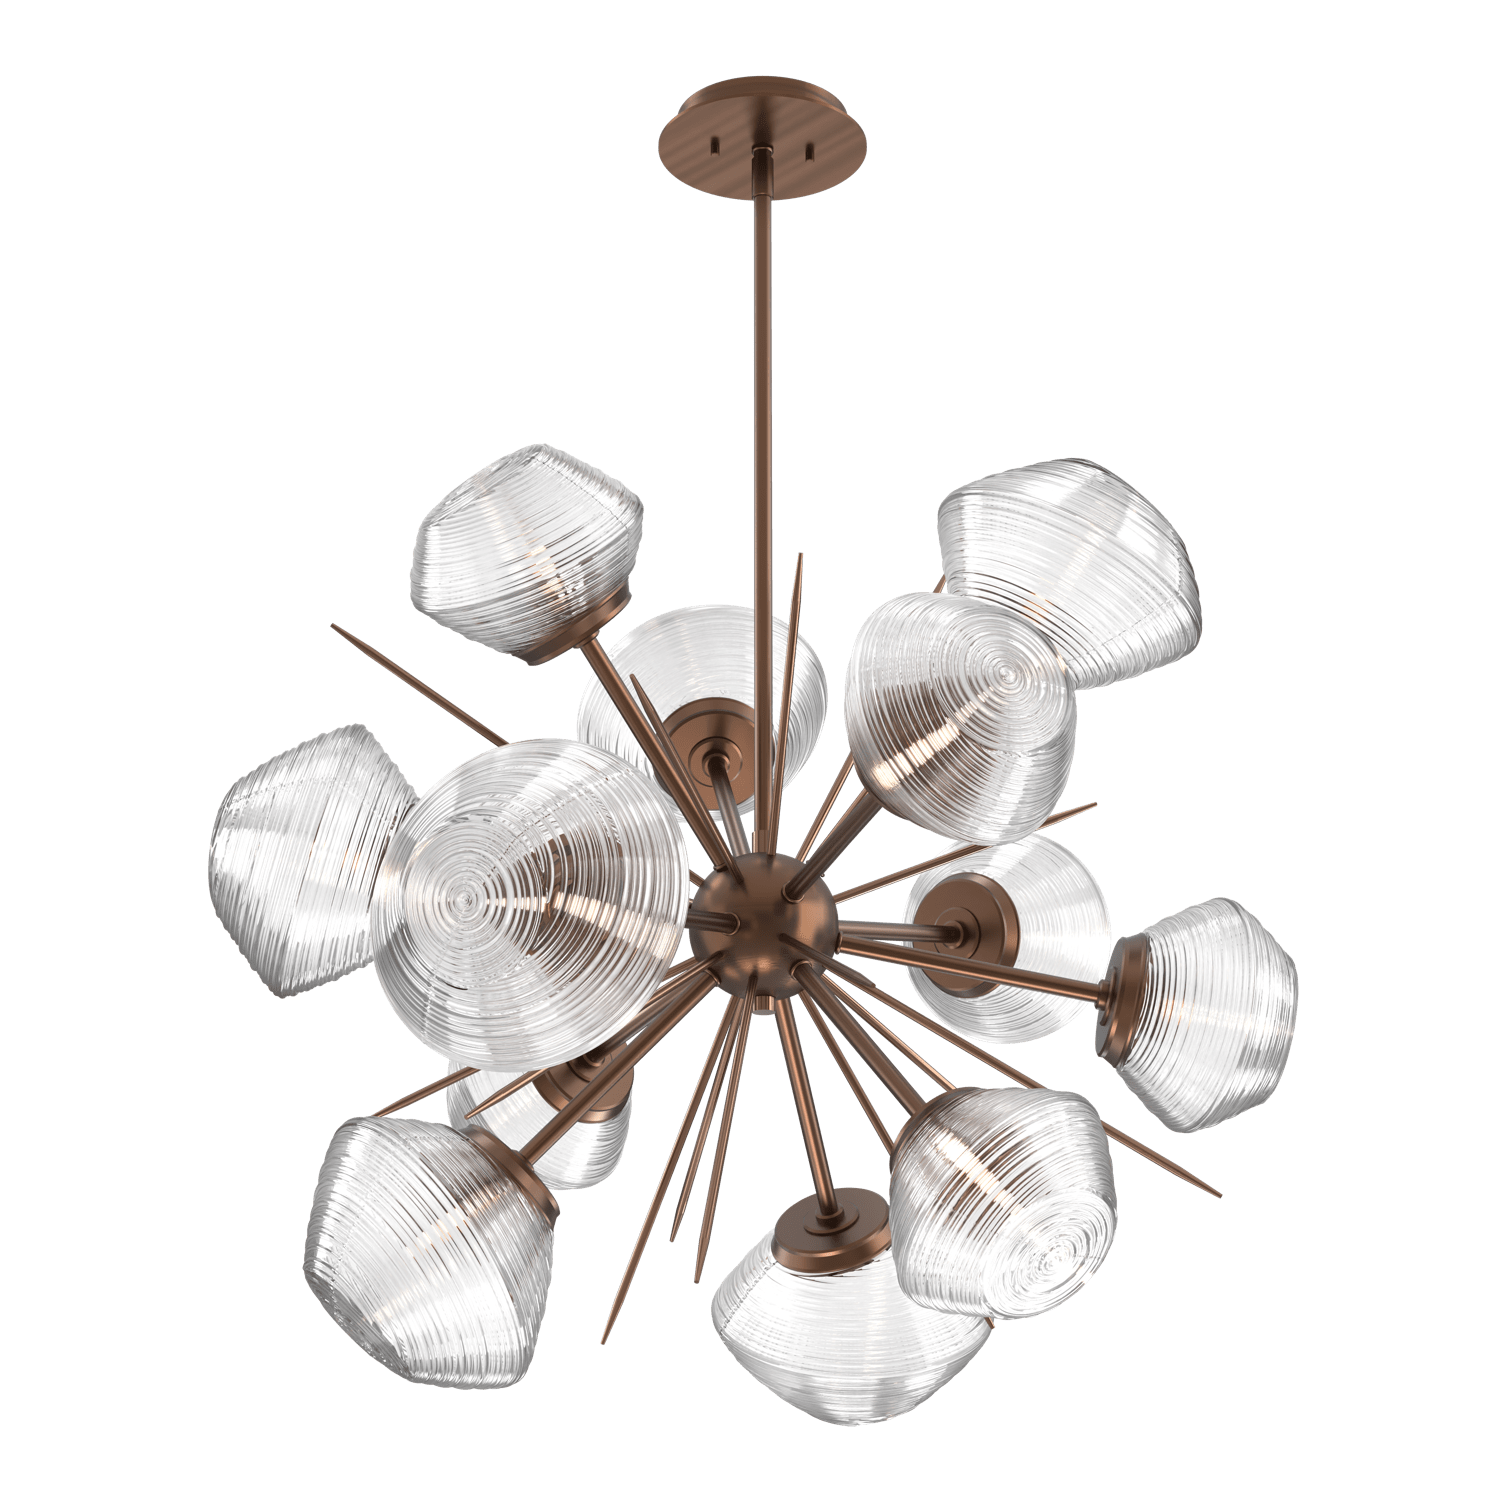 CHB0089-0G-RB-C-Hammerton-Studio-Mesa-36-inch-starburst-chandelier-with-oil-rubbed-bronze-finish-and-clear-blown-glass-shades-and-LED-lamping